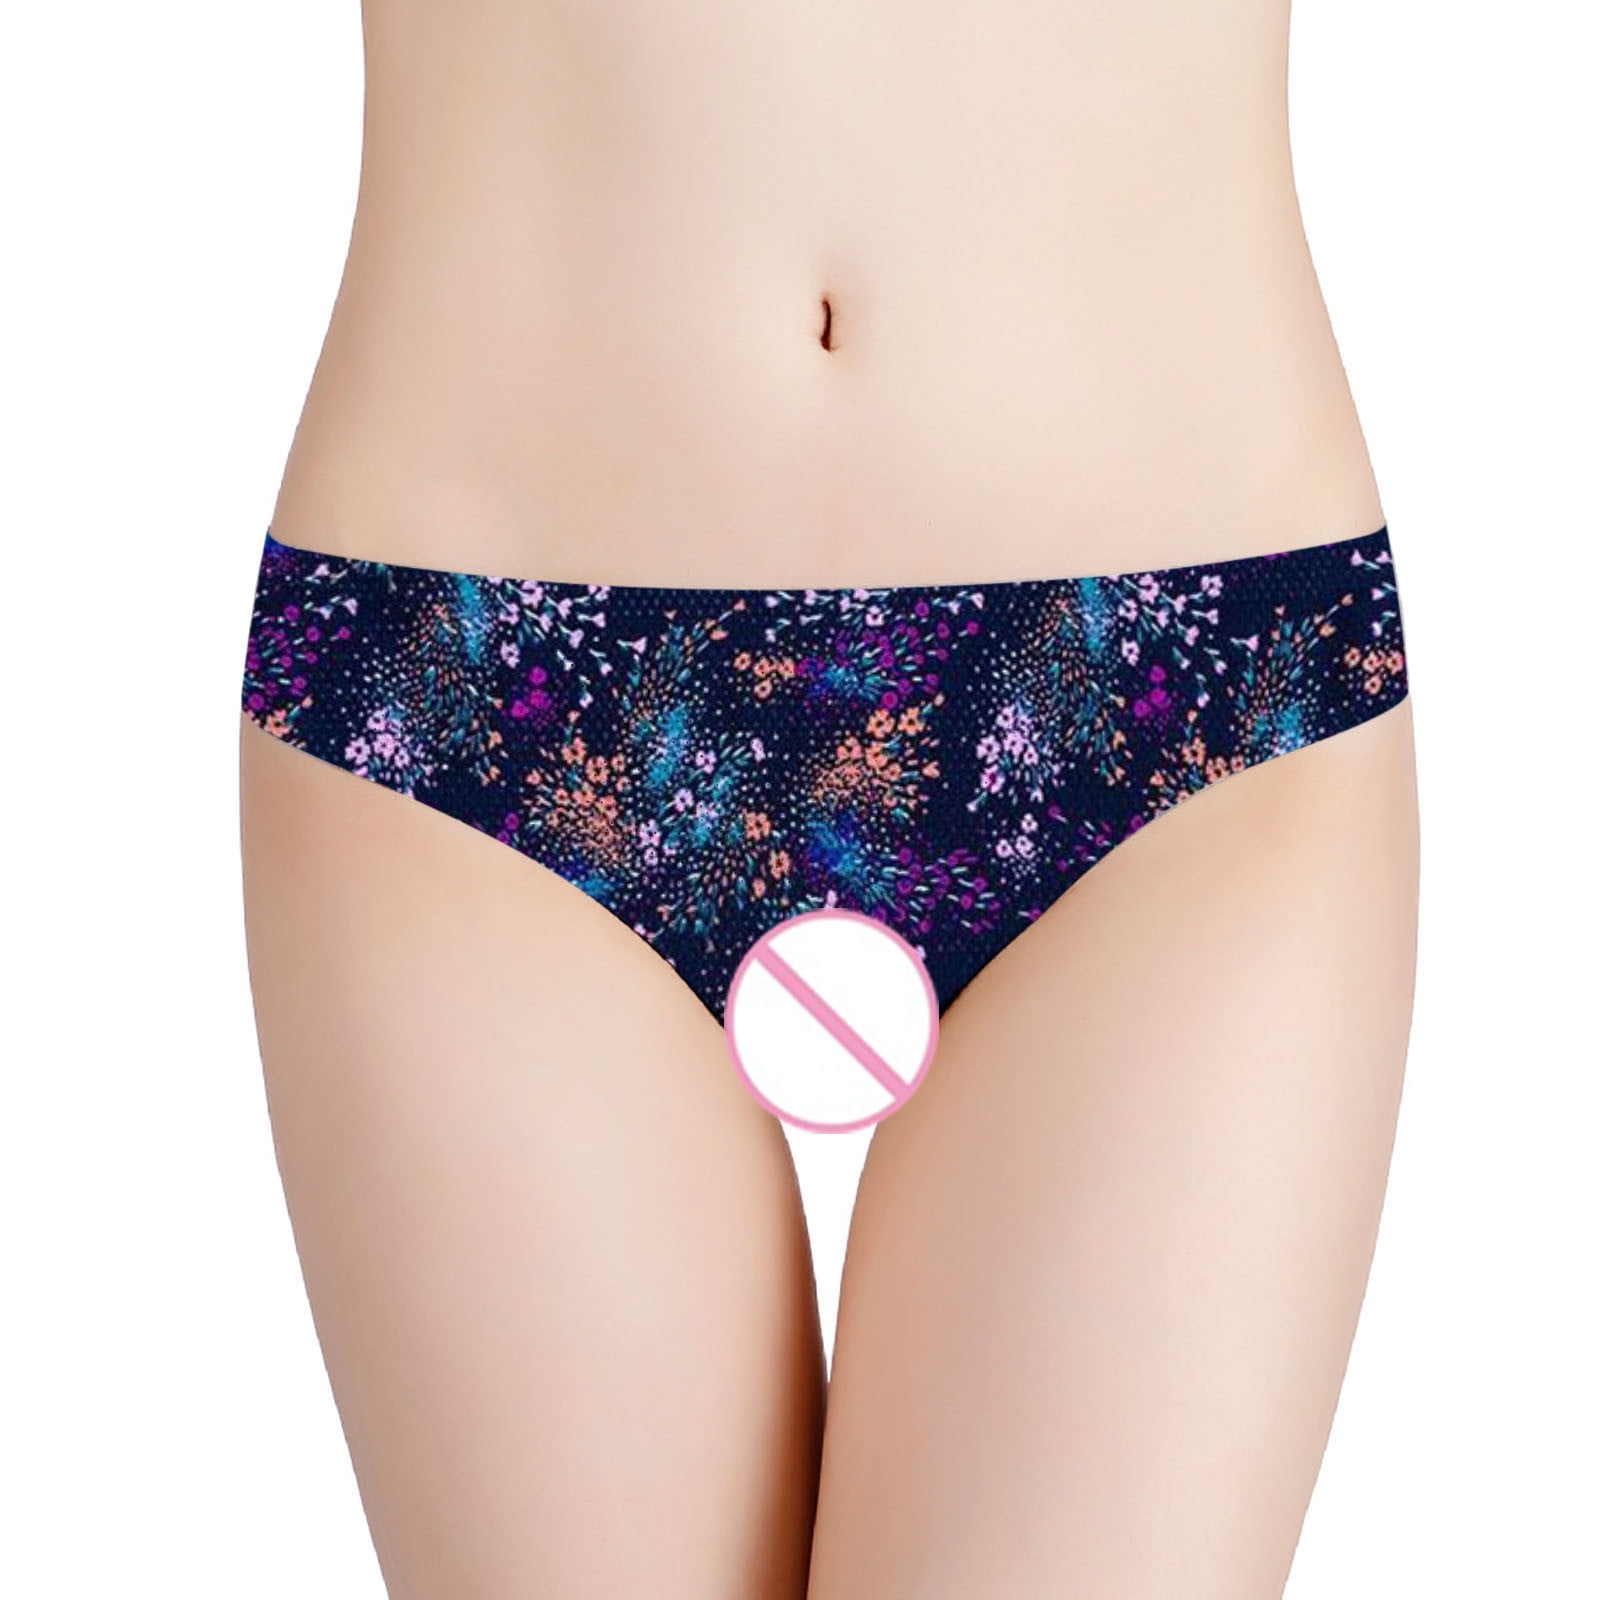 Efsteb Panties for Women Fashiaon Breathable Comfortable Briefs